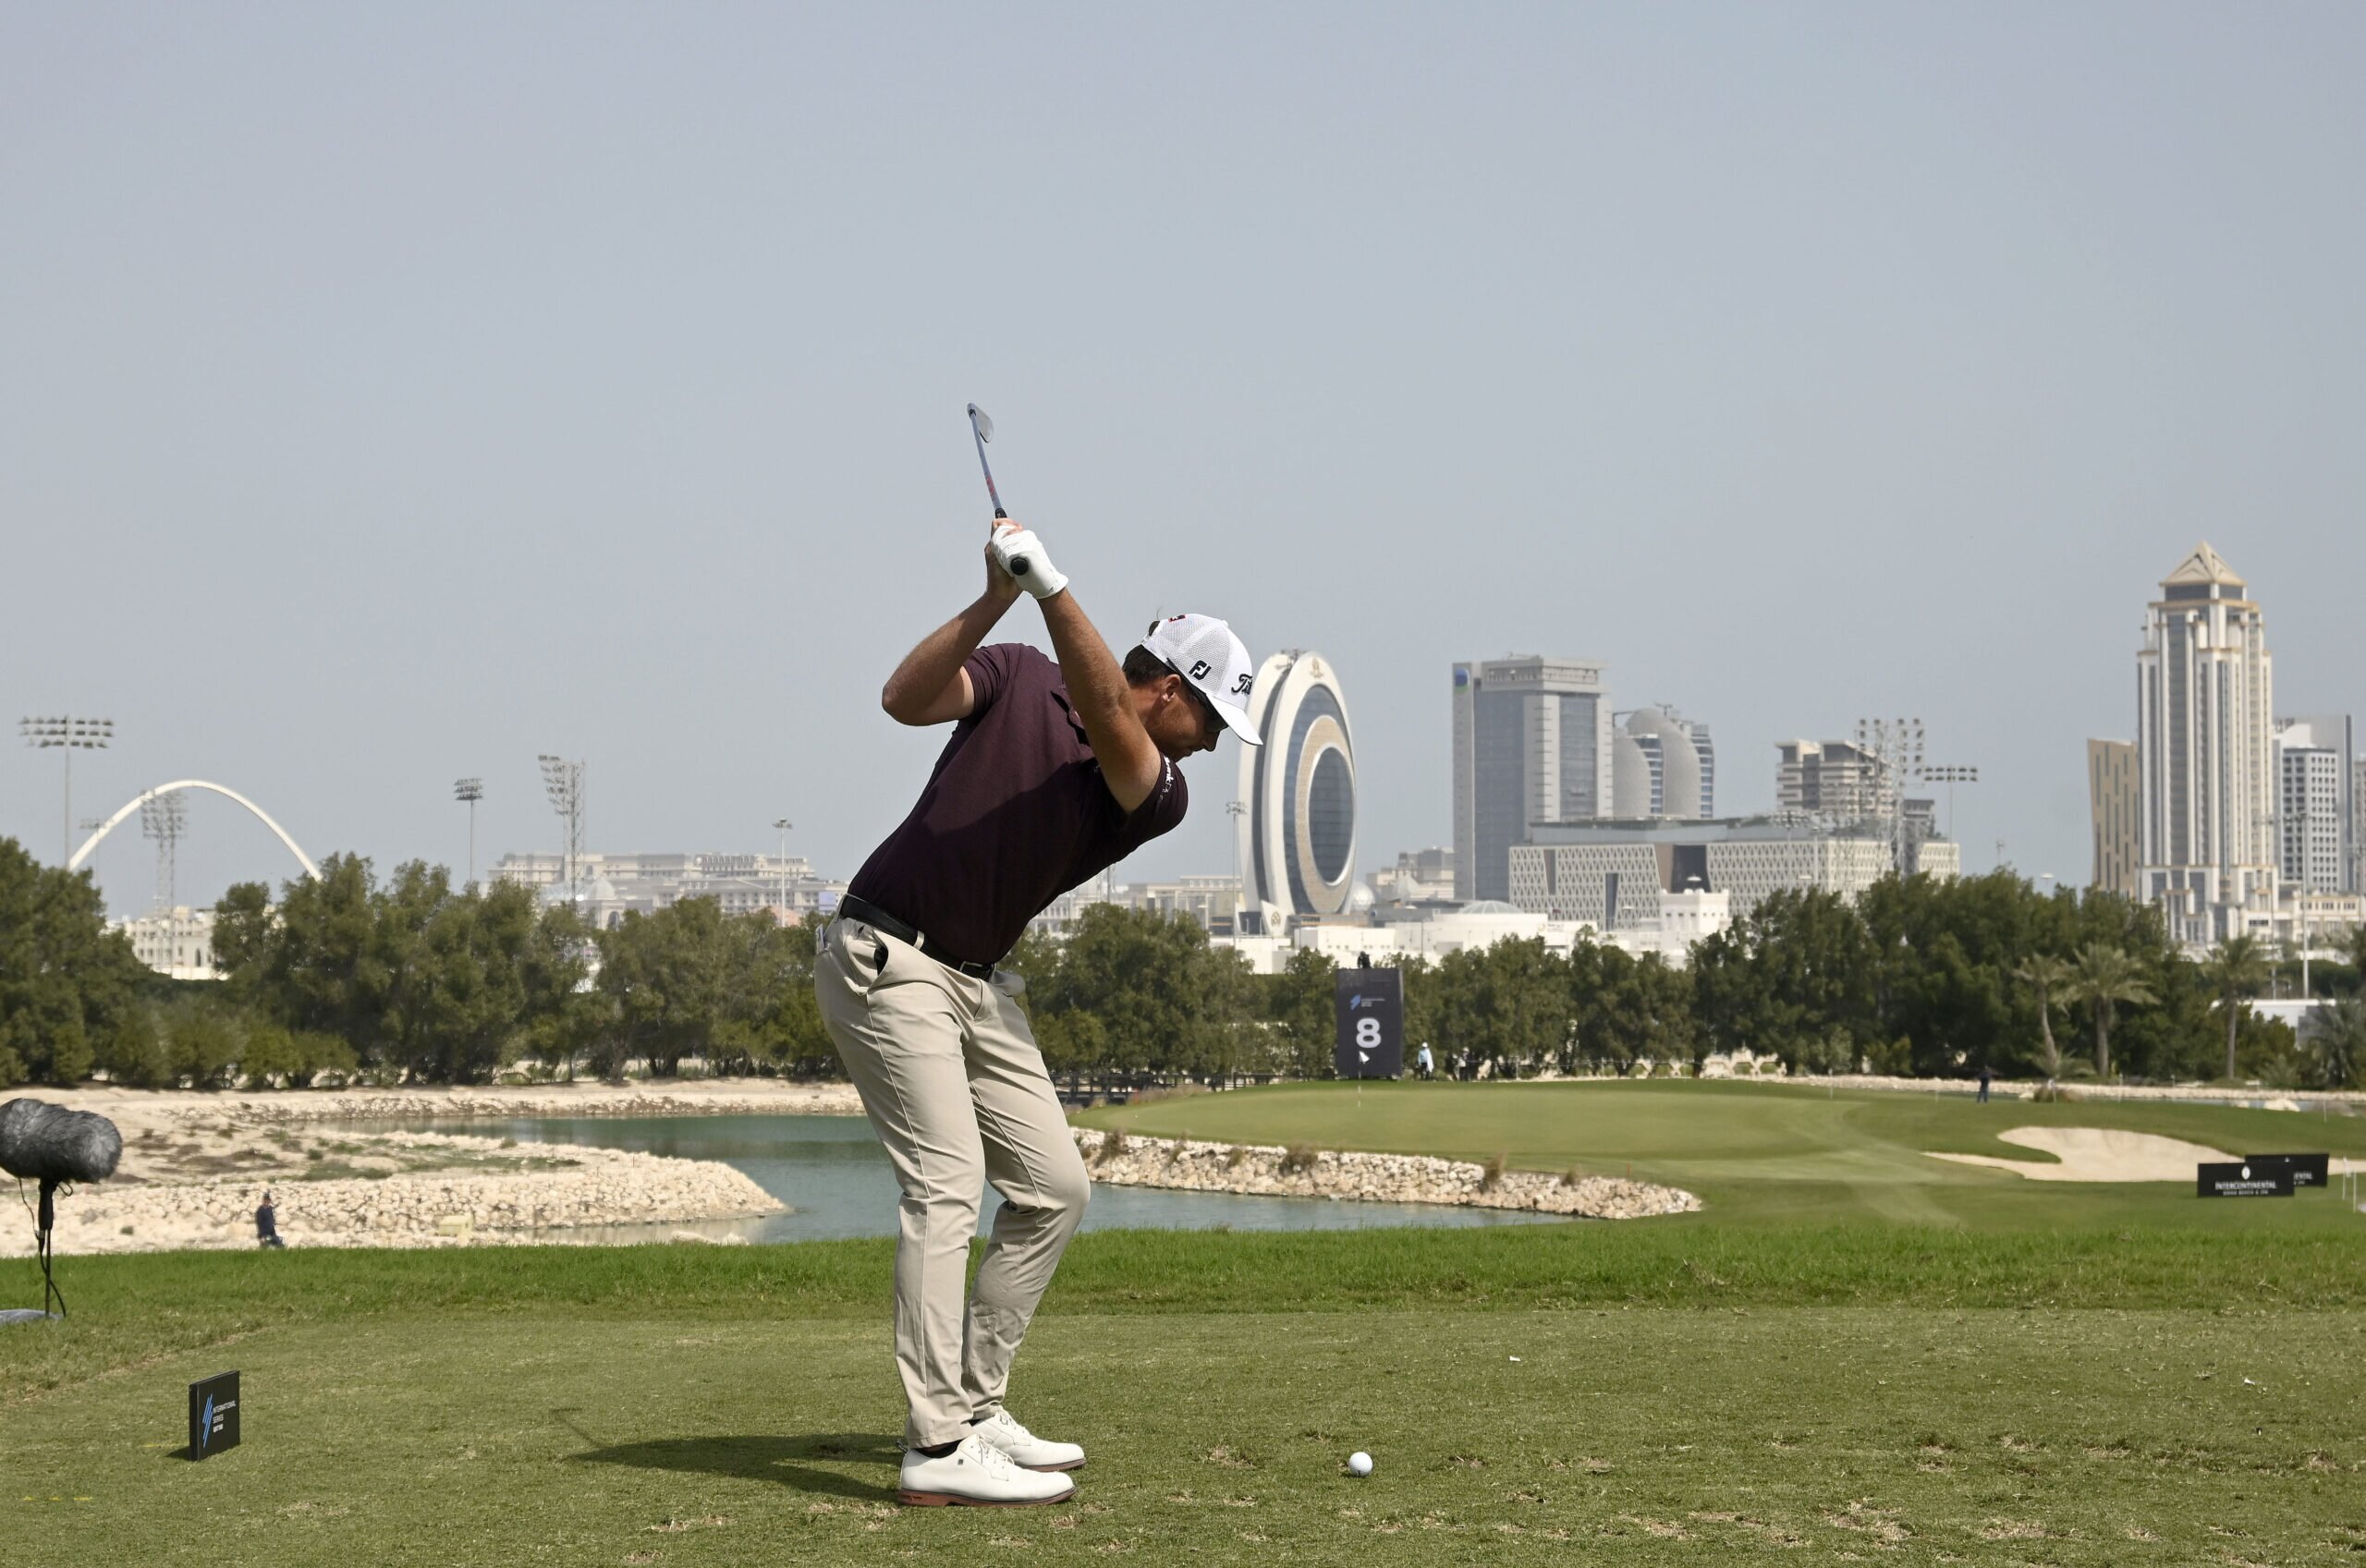 Andy Ogletree of the USA pictured during Round Four on Sunday February 19, 2023 at the US$2.5 million International Series Qatar at Doha Golf Club, Doha, Qatar. The tournament is being held from February 16-19, 2023. Picture by Paul Lakatos/Asian Tour.